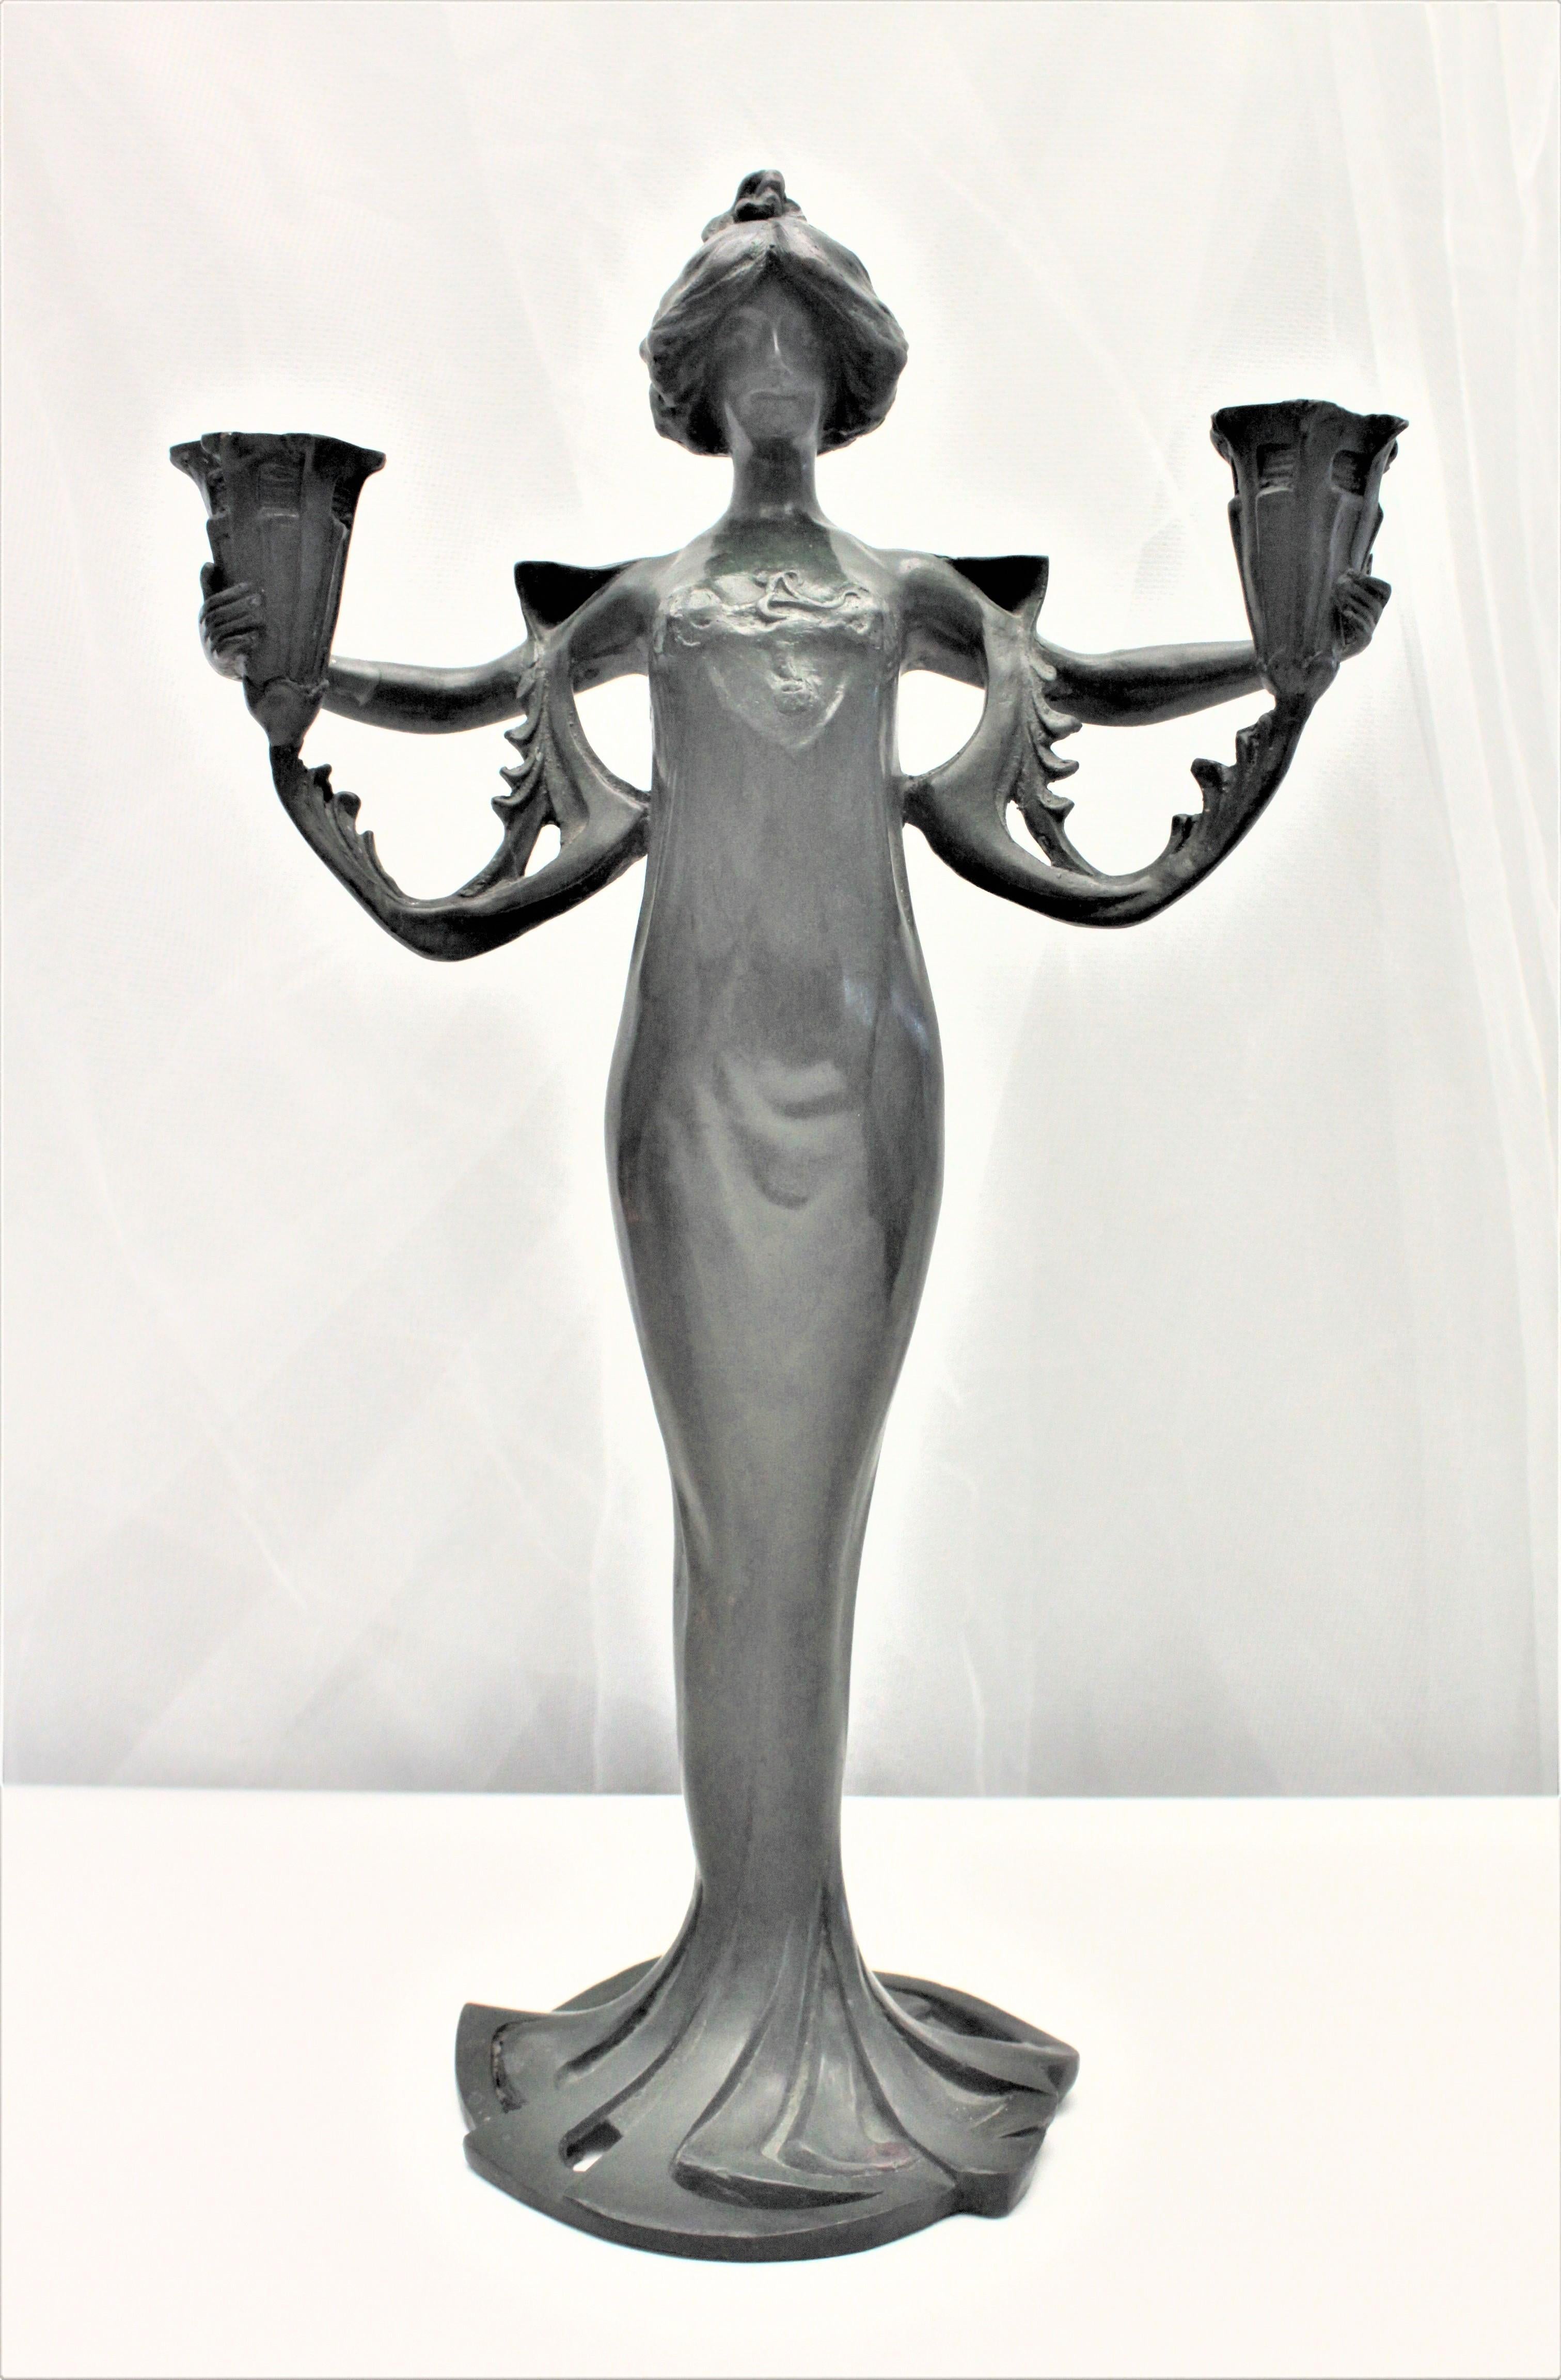 This antique candleholder is unsigned and unmarked, but believed to have been made in the United States. The cast spelter candleholder depicts a robed woman with outstretched arms which function as a double candleholder. This stylized female cast